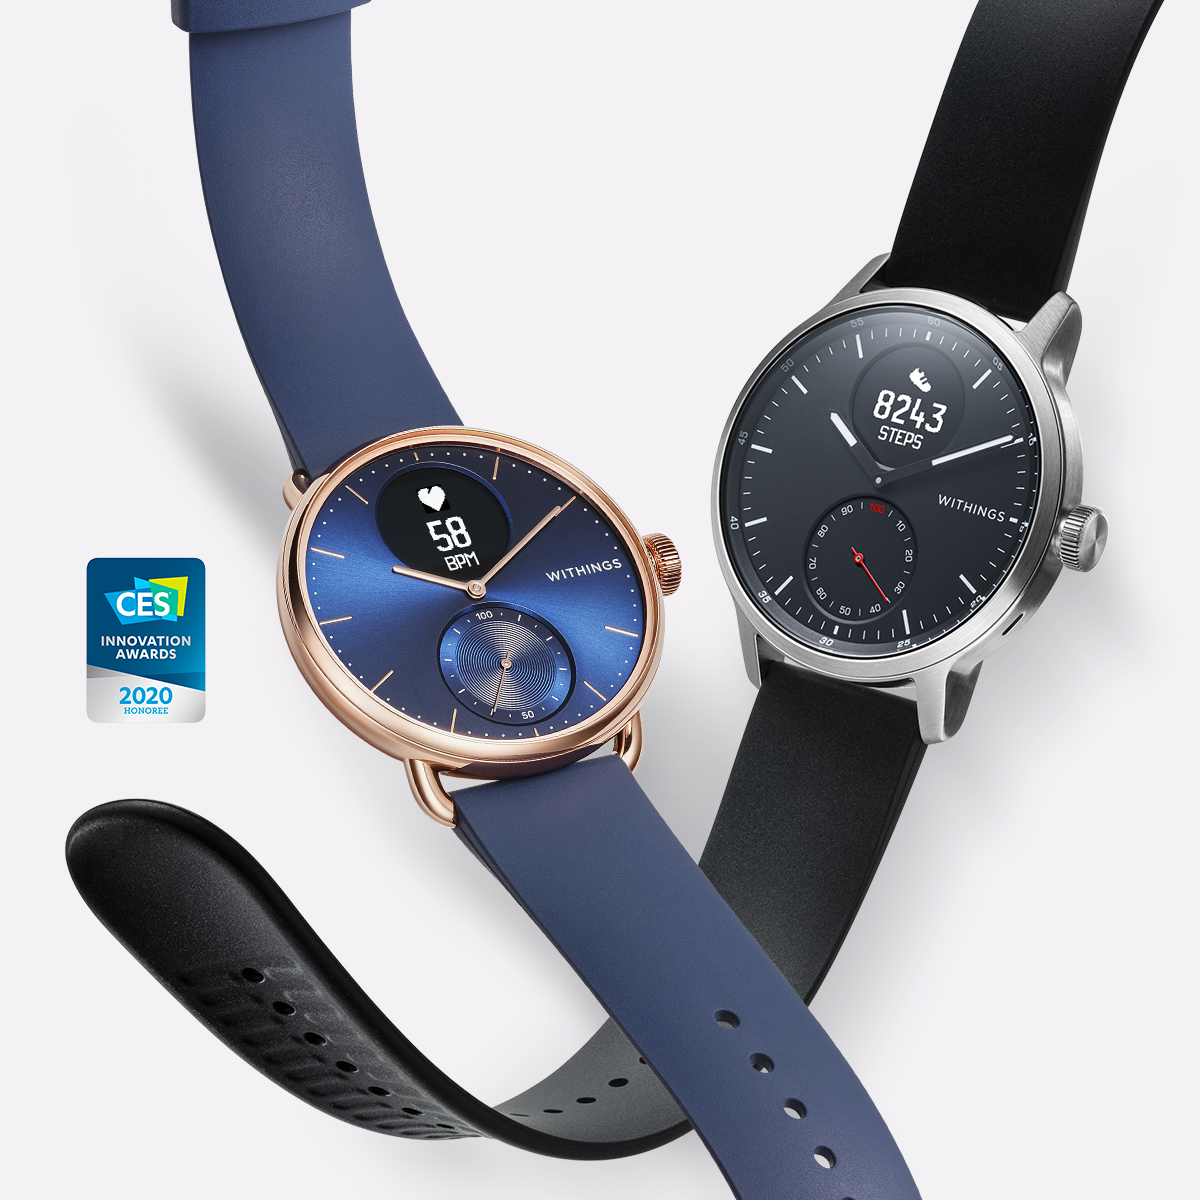 www.withings.com